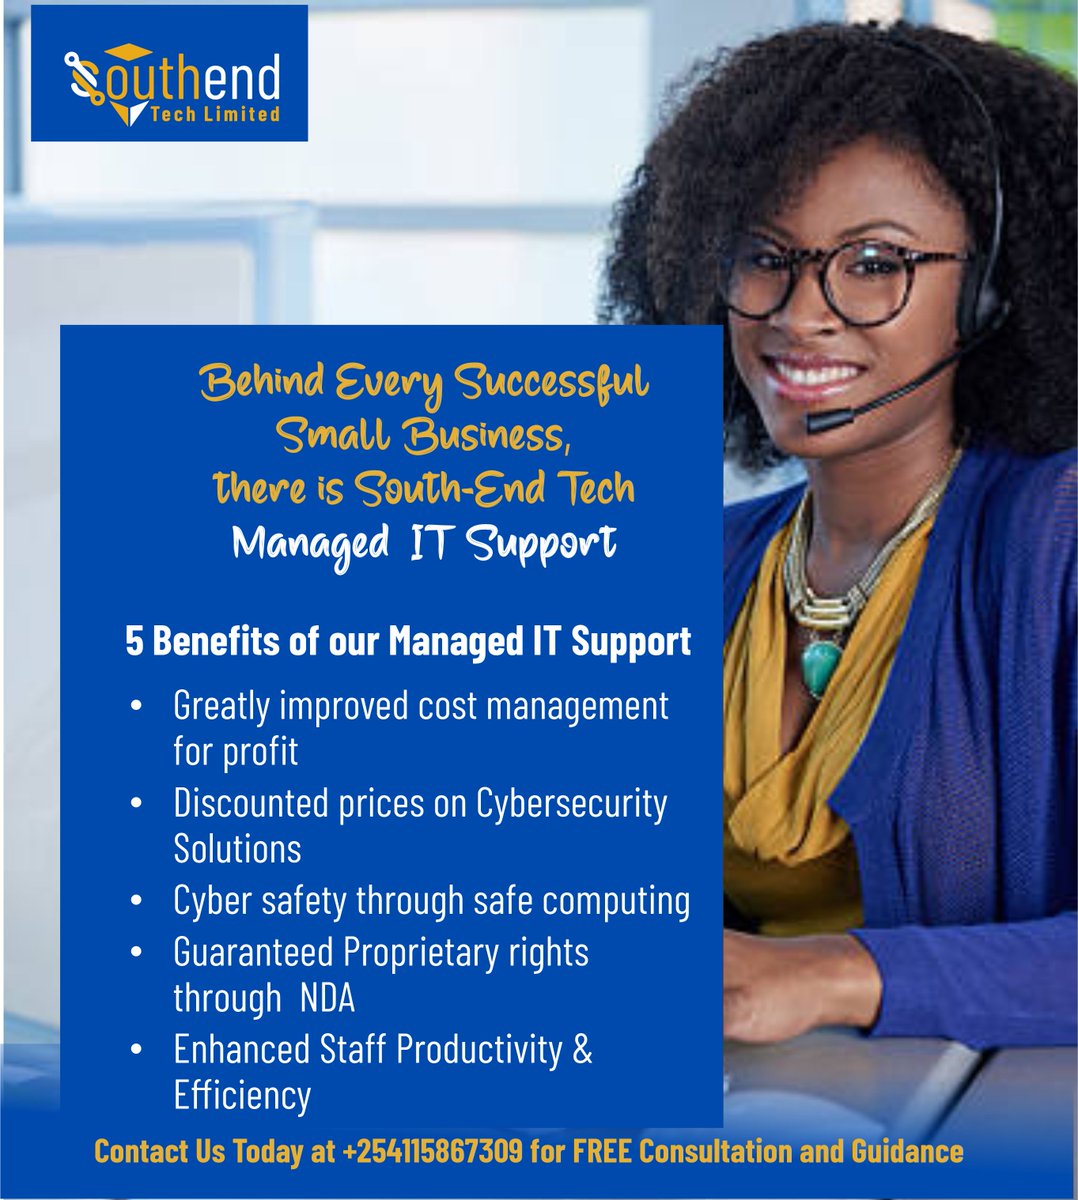 Benefits of outsourced #itmanagedservices
~ #Achieve more with specialised resources and the capacity to manage day-to-day operational support on your infrastructure and applications.
~ #Build capacity in your organisation to focus on strategic business goals and programmes.